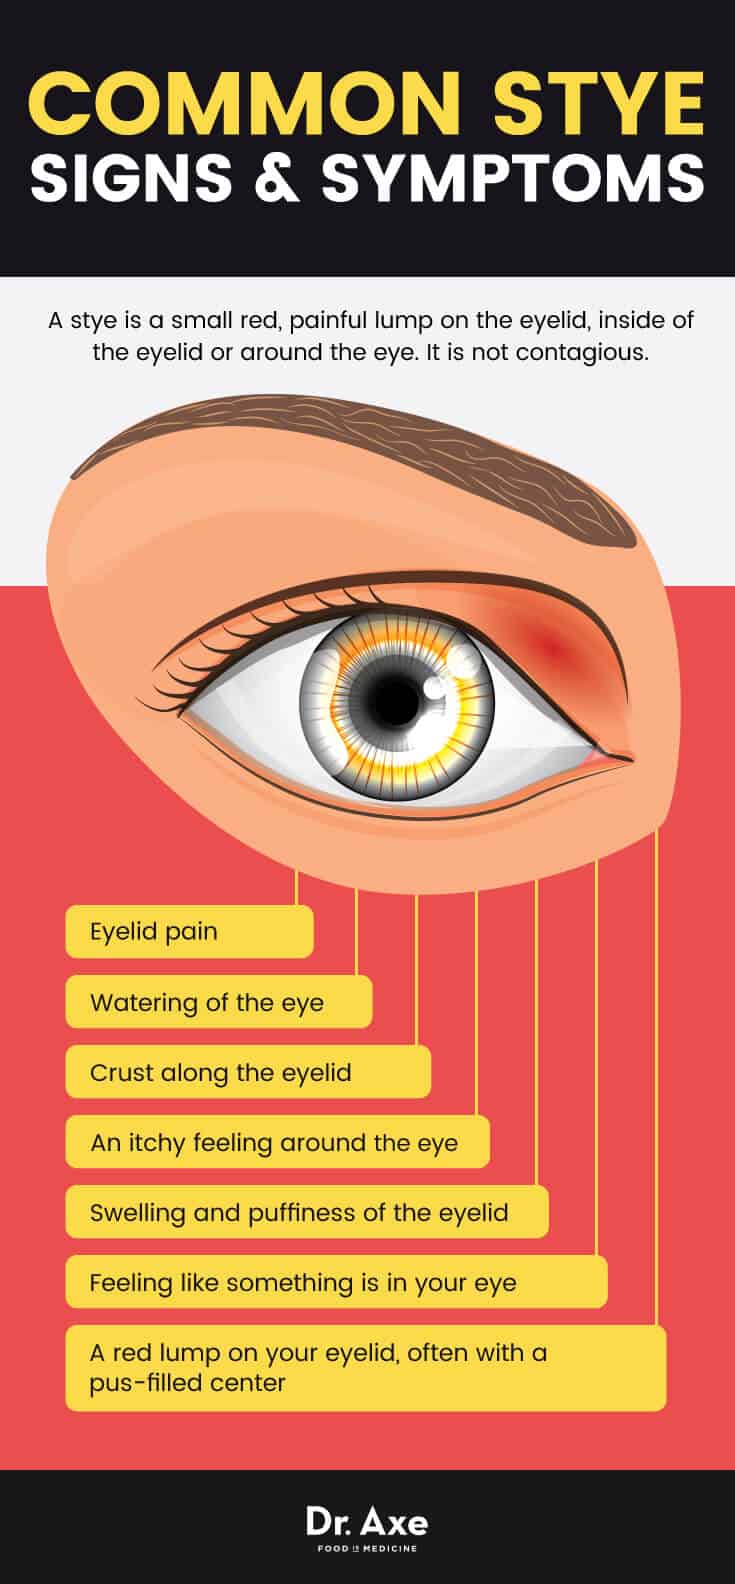 How to Get Rid of a Stye: Common Signs & Symptoms - Dr. Axe